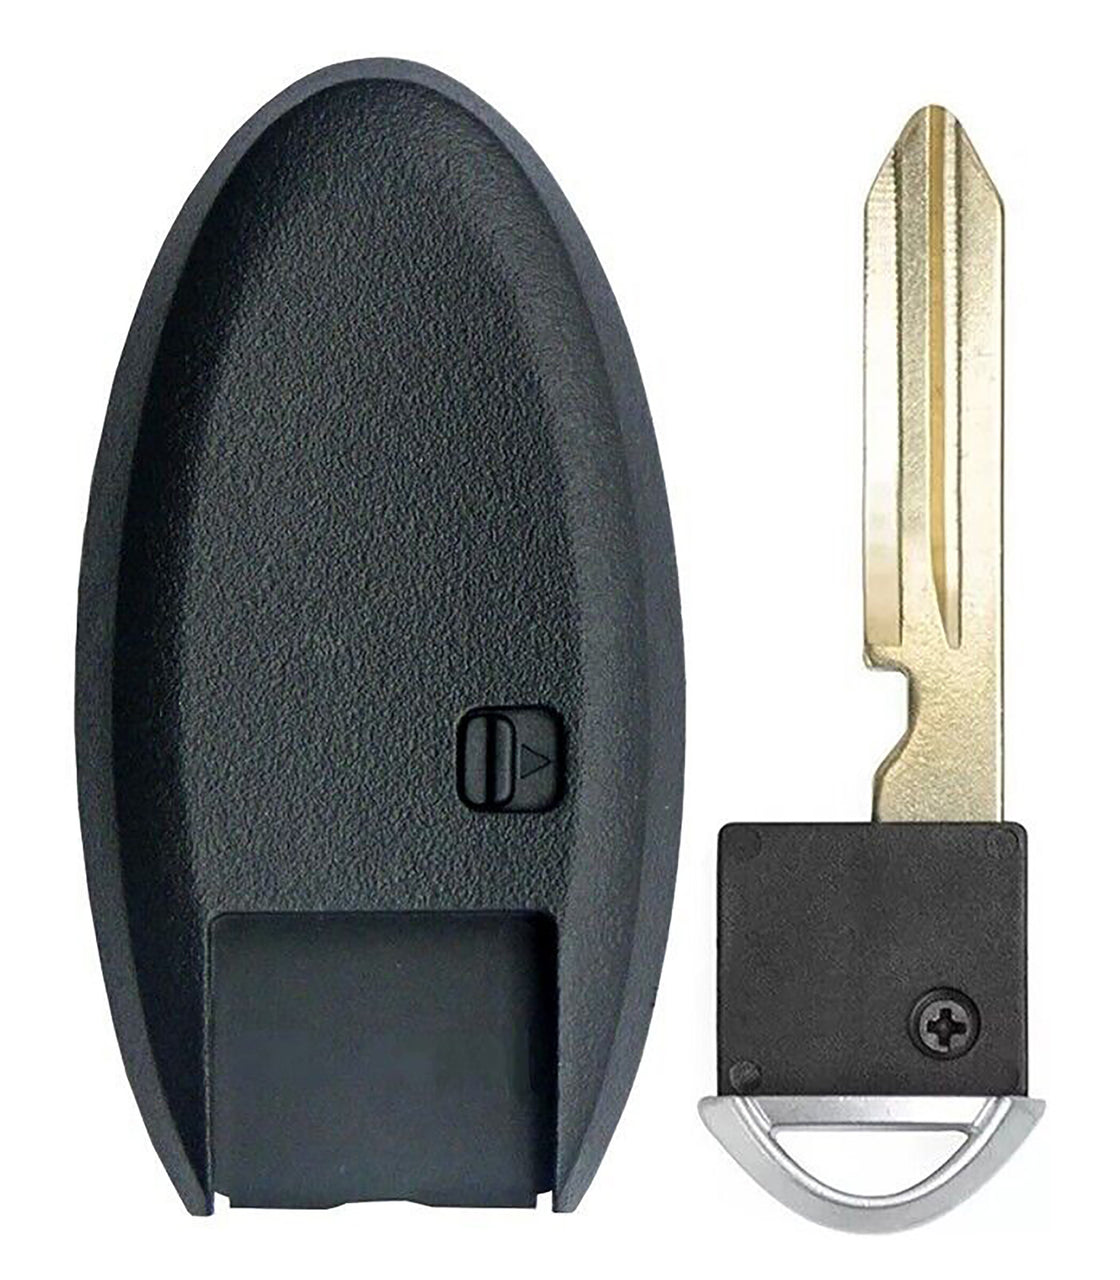 1x New Replacement Proximity Key Fob SHELL / CASE Compatible with & Fit For Nissan Vehicles - MPN KR5TXN4-N7-04 (NO electronics or Chip inside)